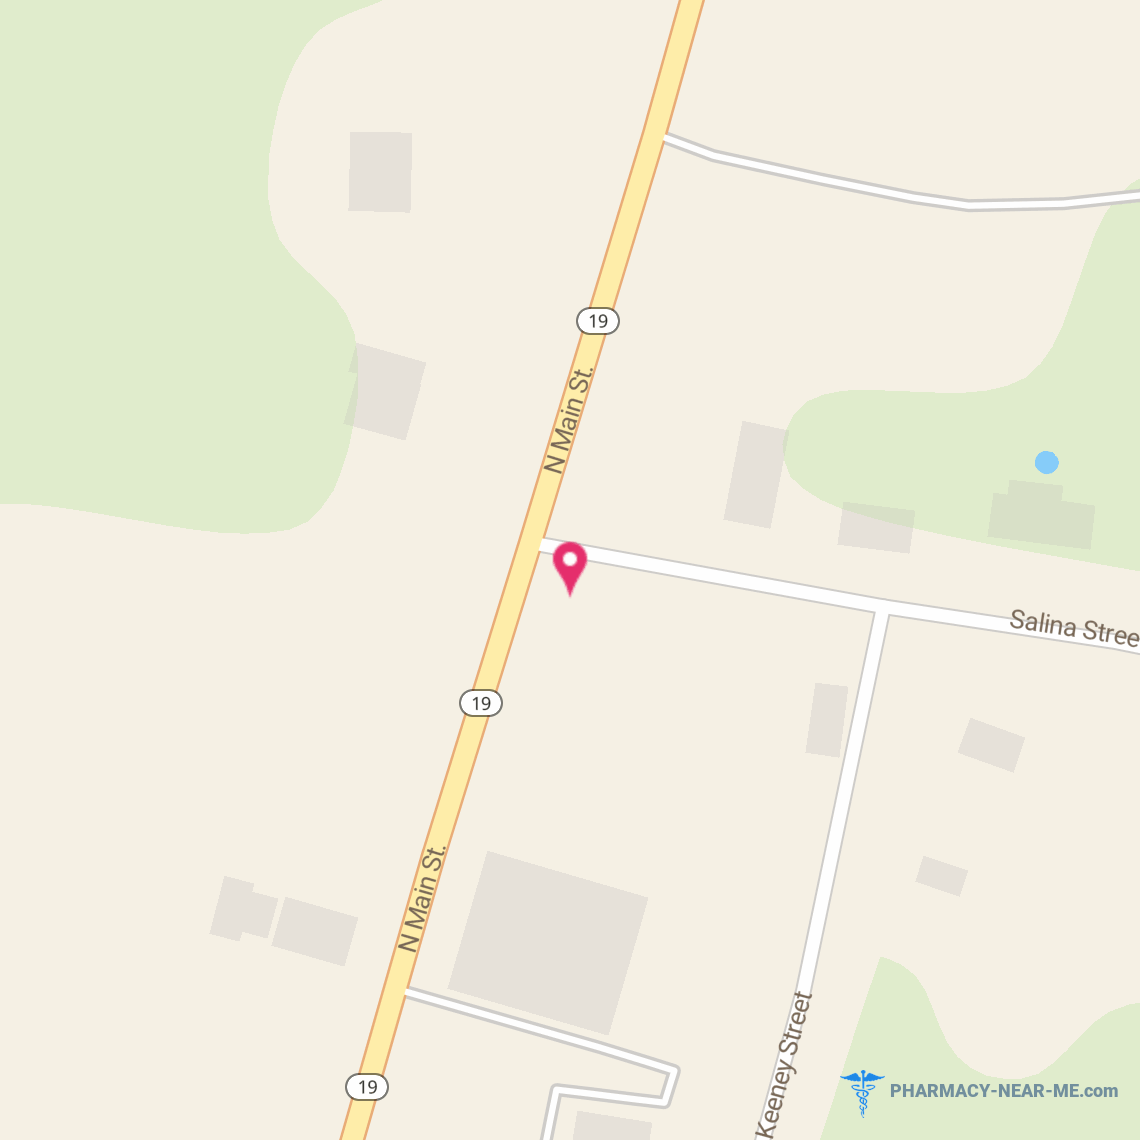 WY CNTY COMM HOSP - Pharmacy Hours, Phone, Reviews & Information: 400 North Main Street, Warsaw, New York 14569, United States